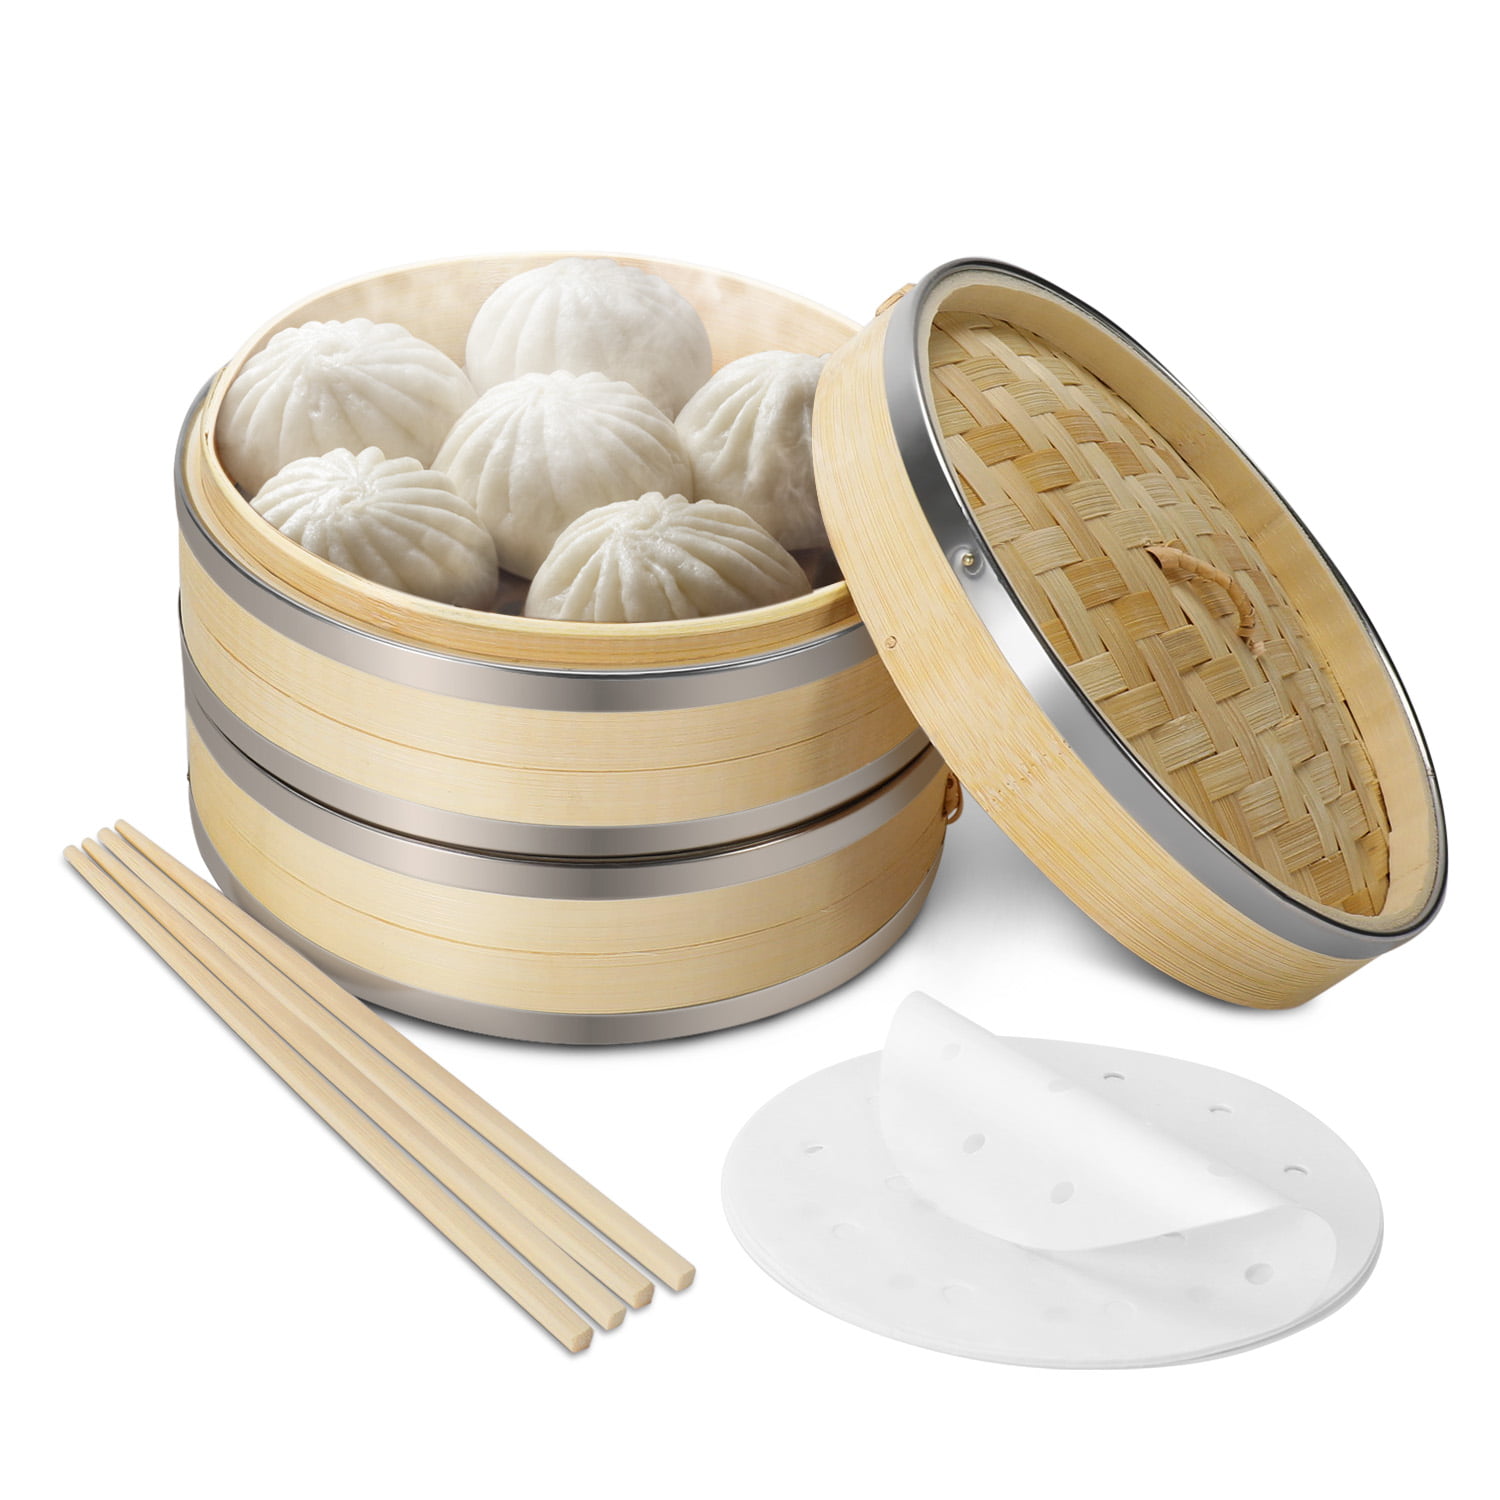 Details about   Chinese Handmade Natural Bamboo Steamer Basket Round Food Meat Steamer Lid Sale